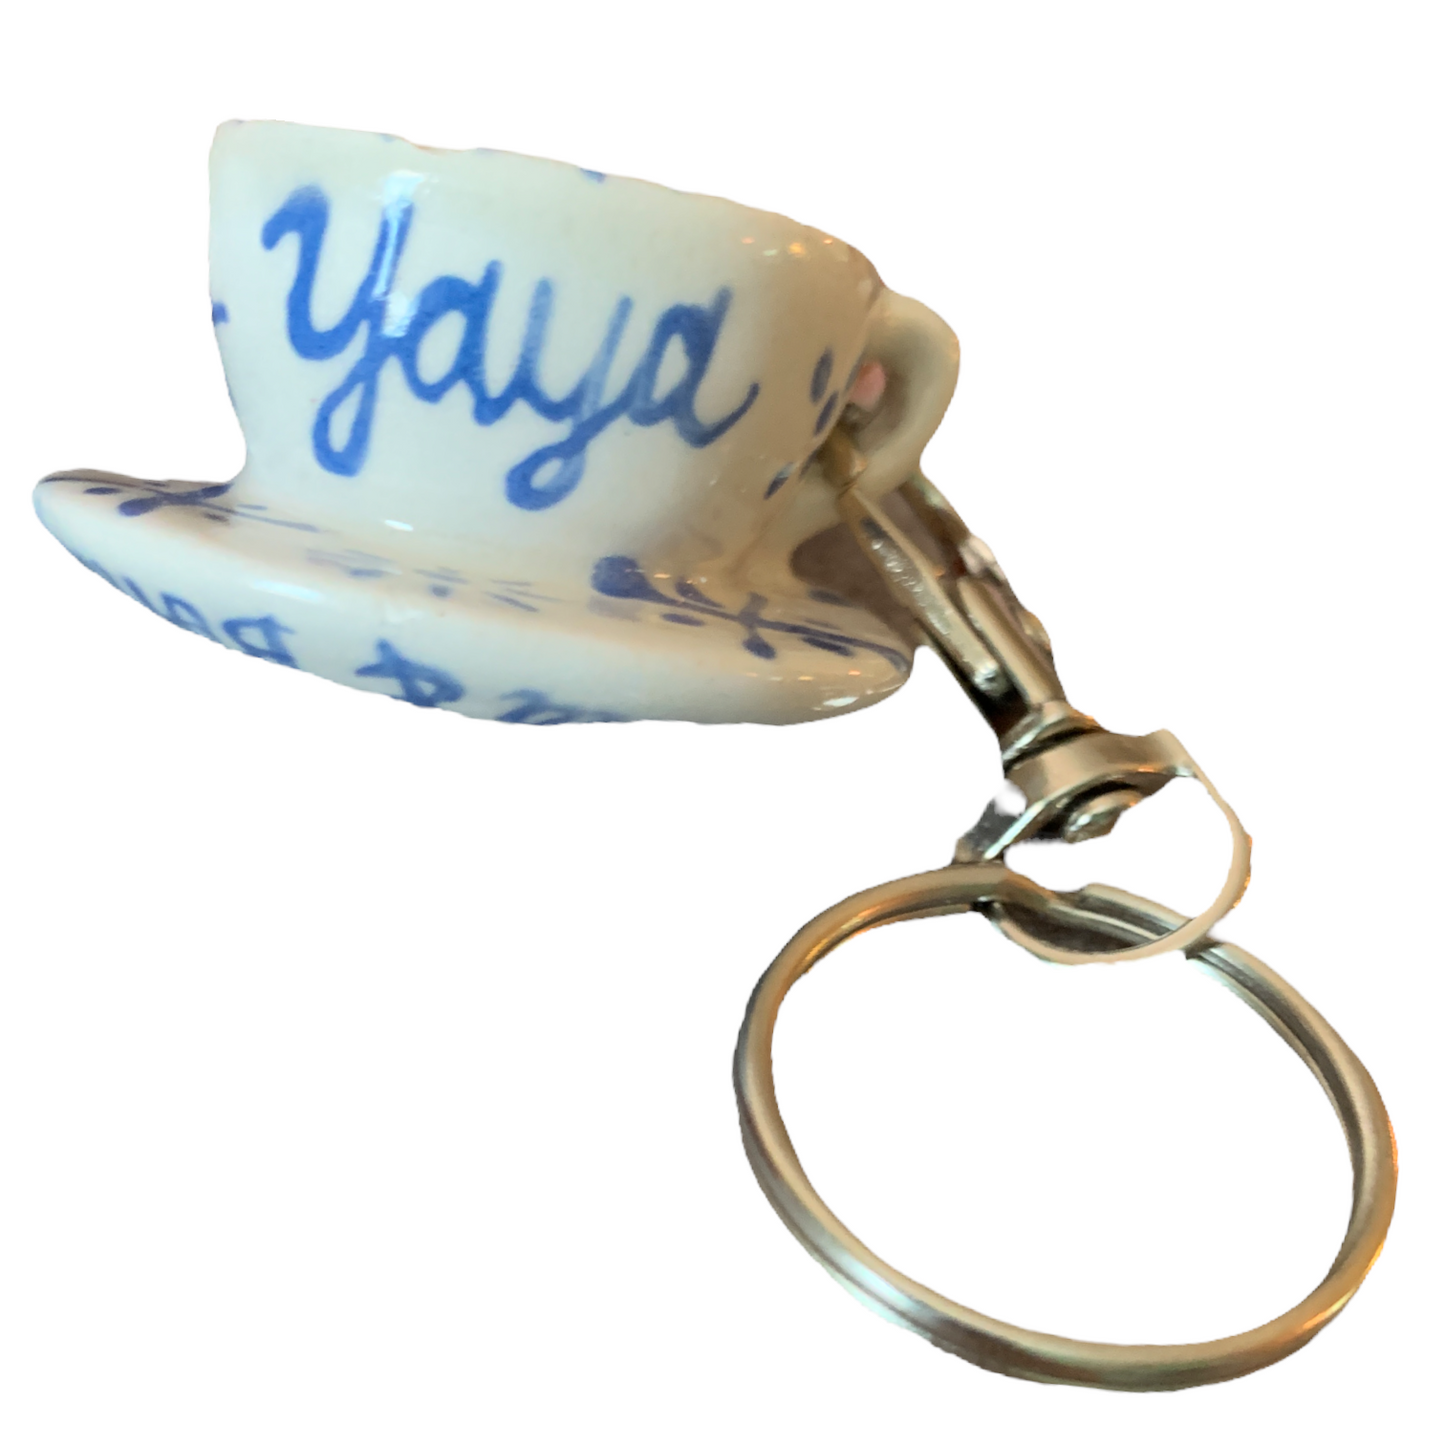 Teacup keychain - personalized